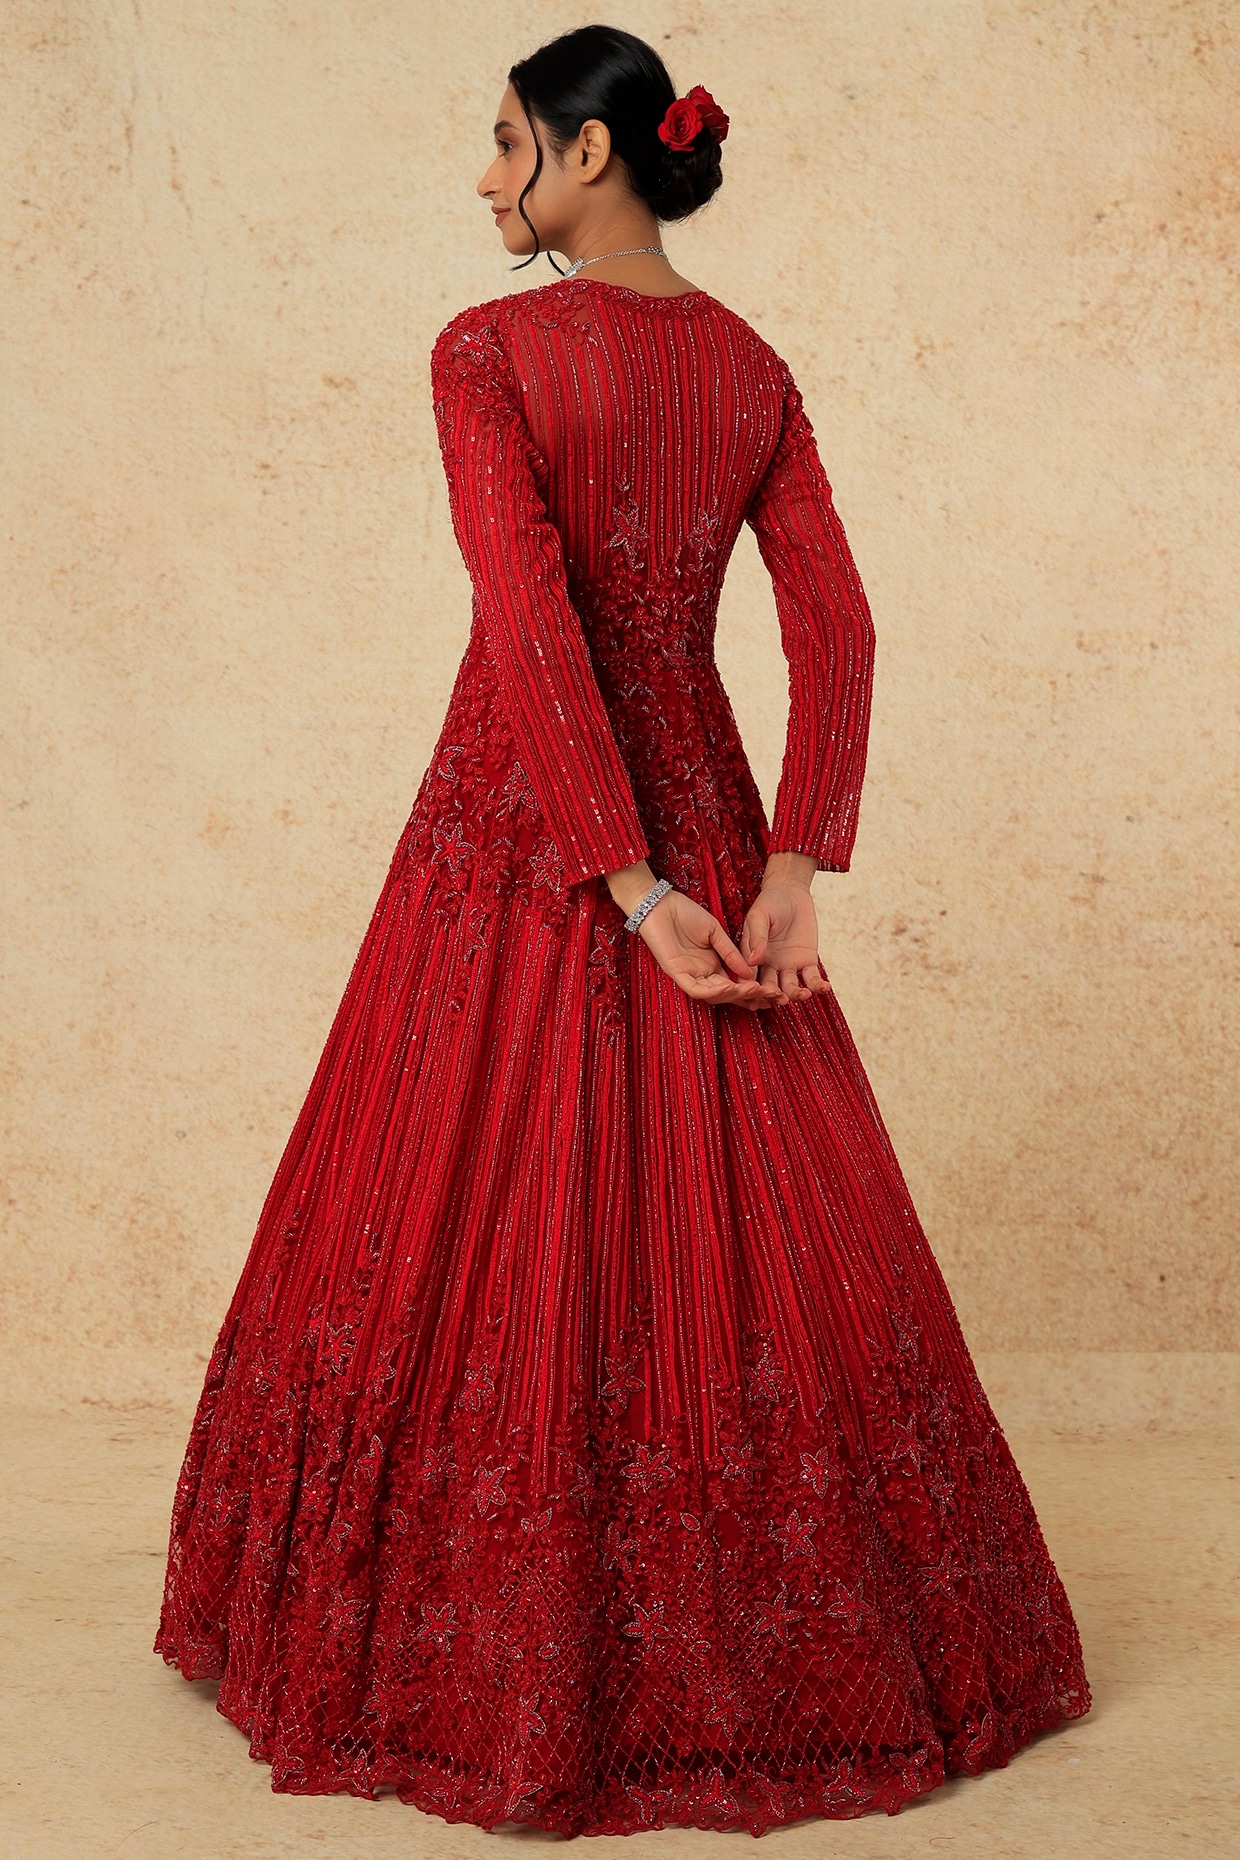 Exquisite Net Fabric Gowns - Shop the Latest EthnicPlus Collection